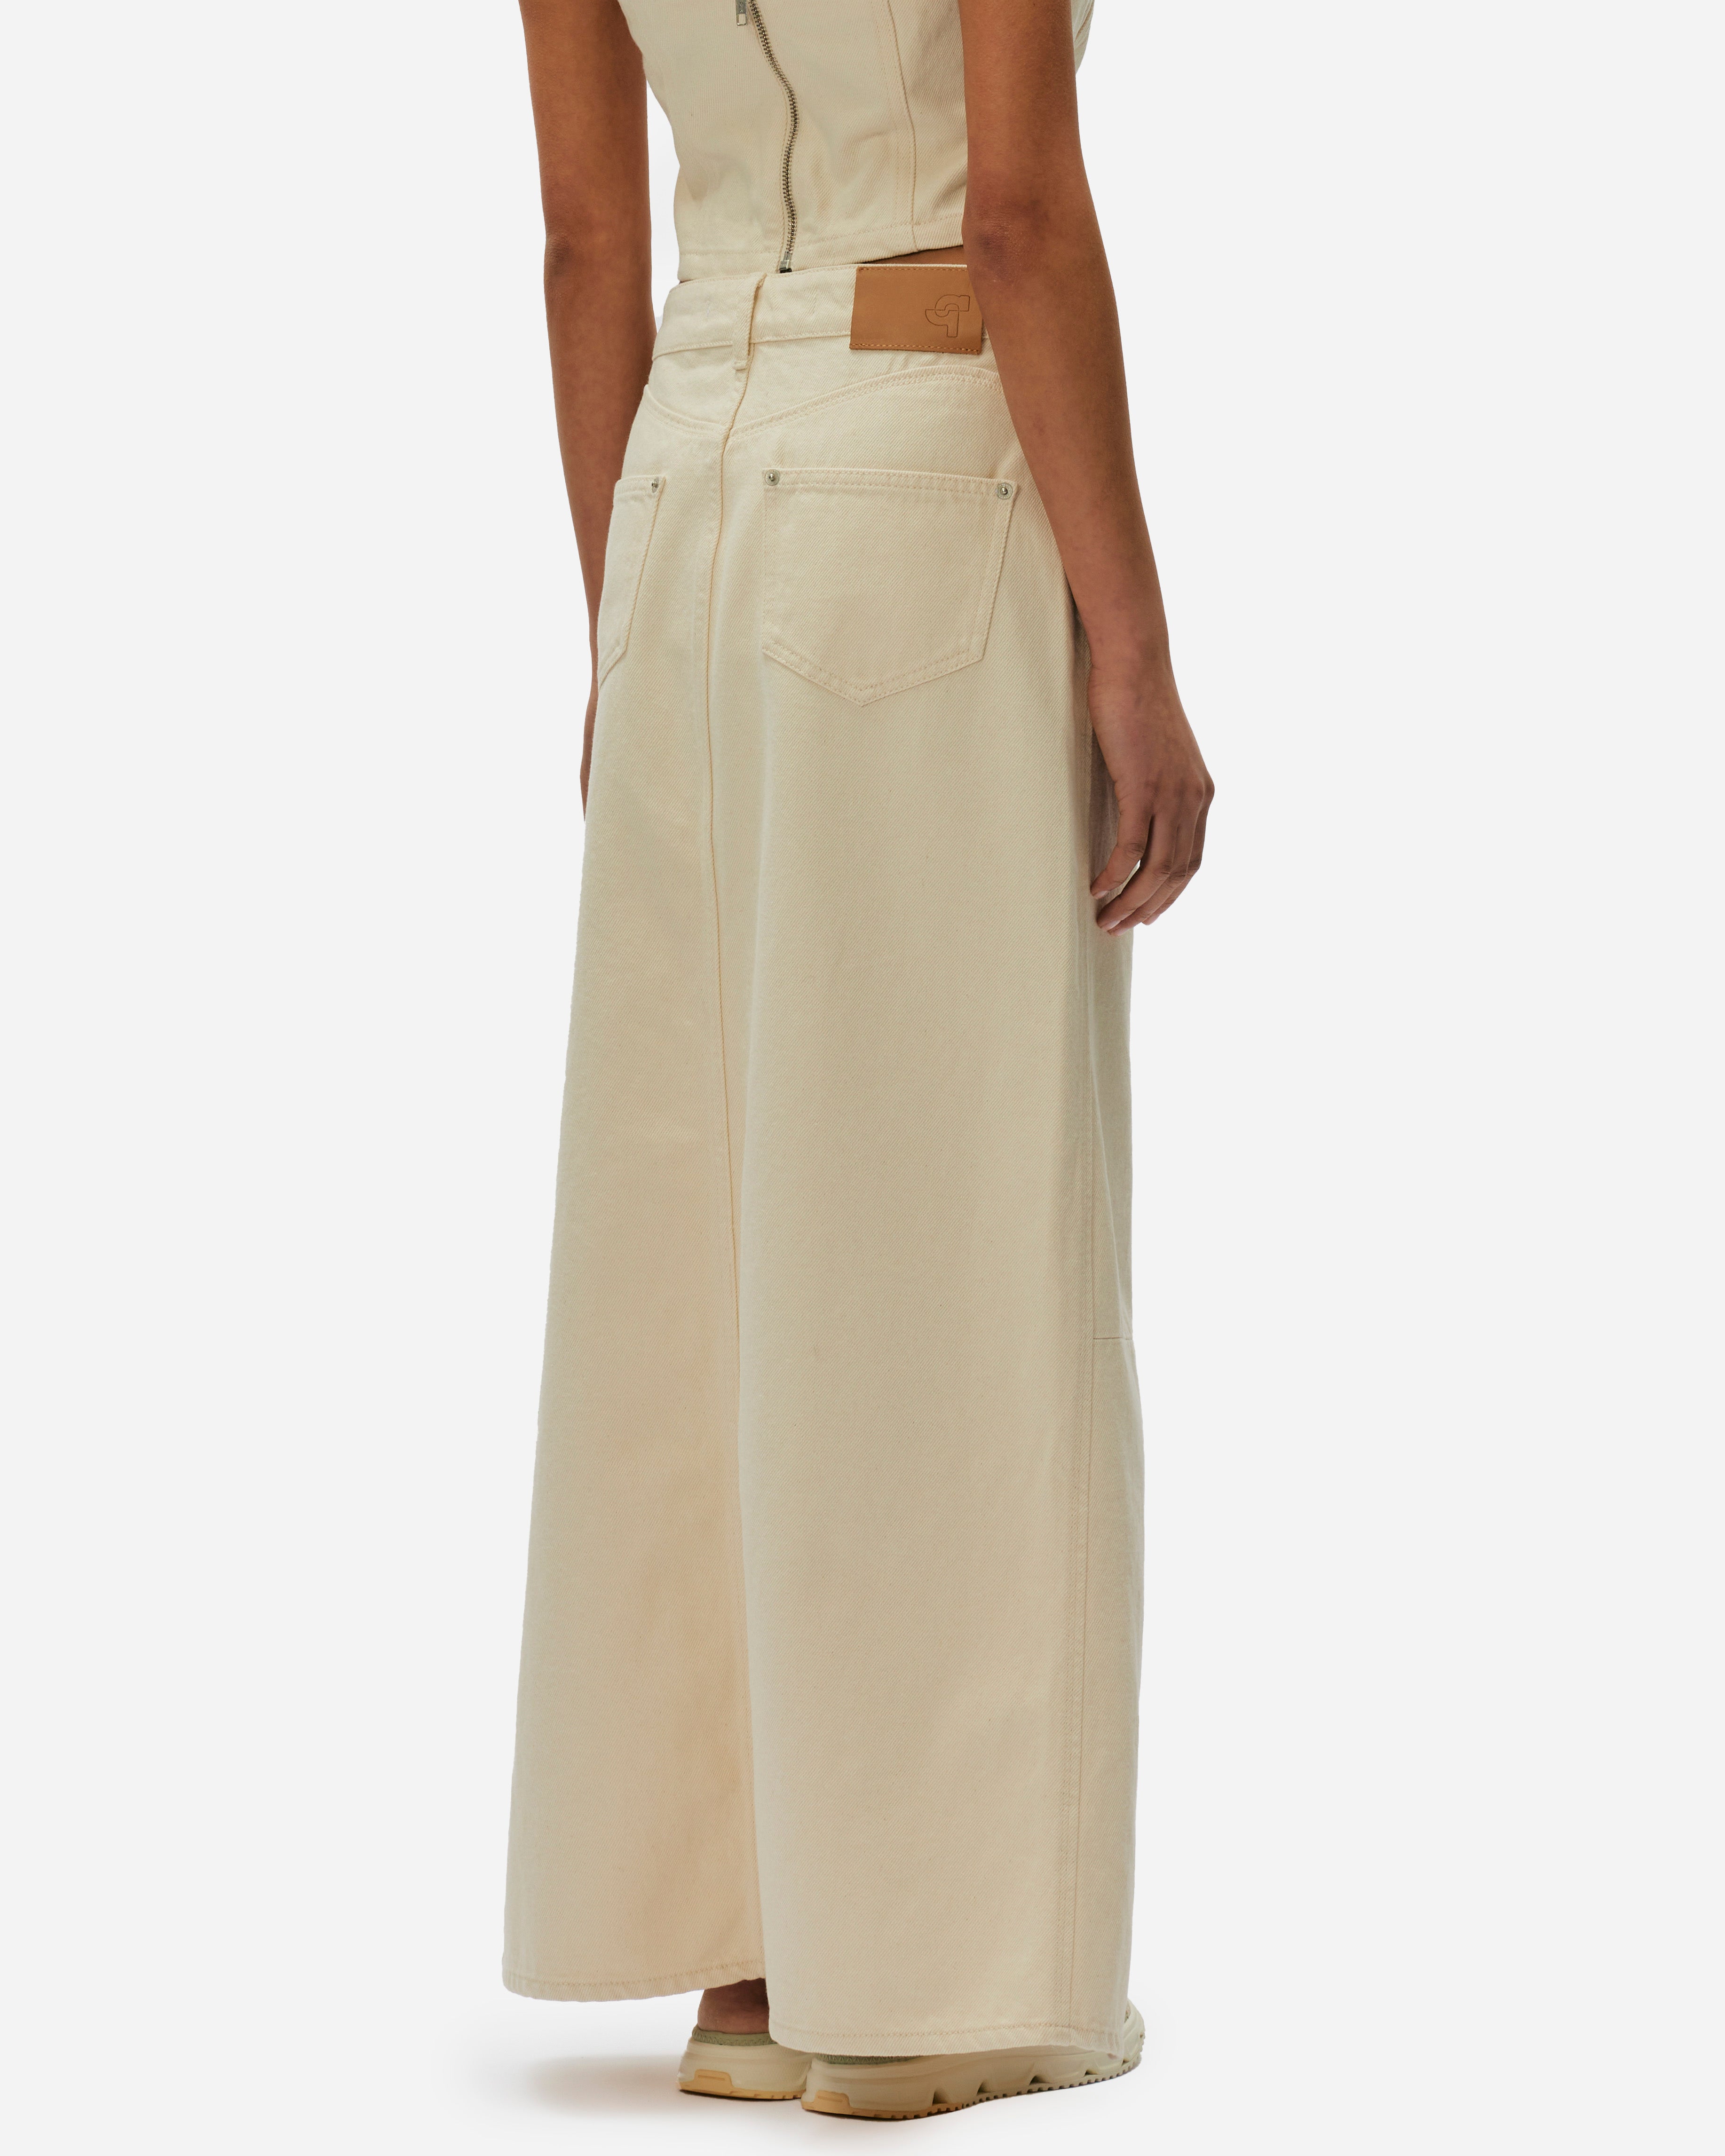 Oval Square Wonder Maxi Skirt Offwhite 20704-1005